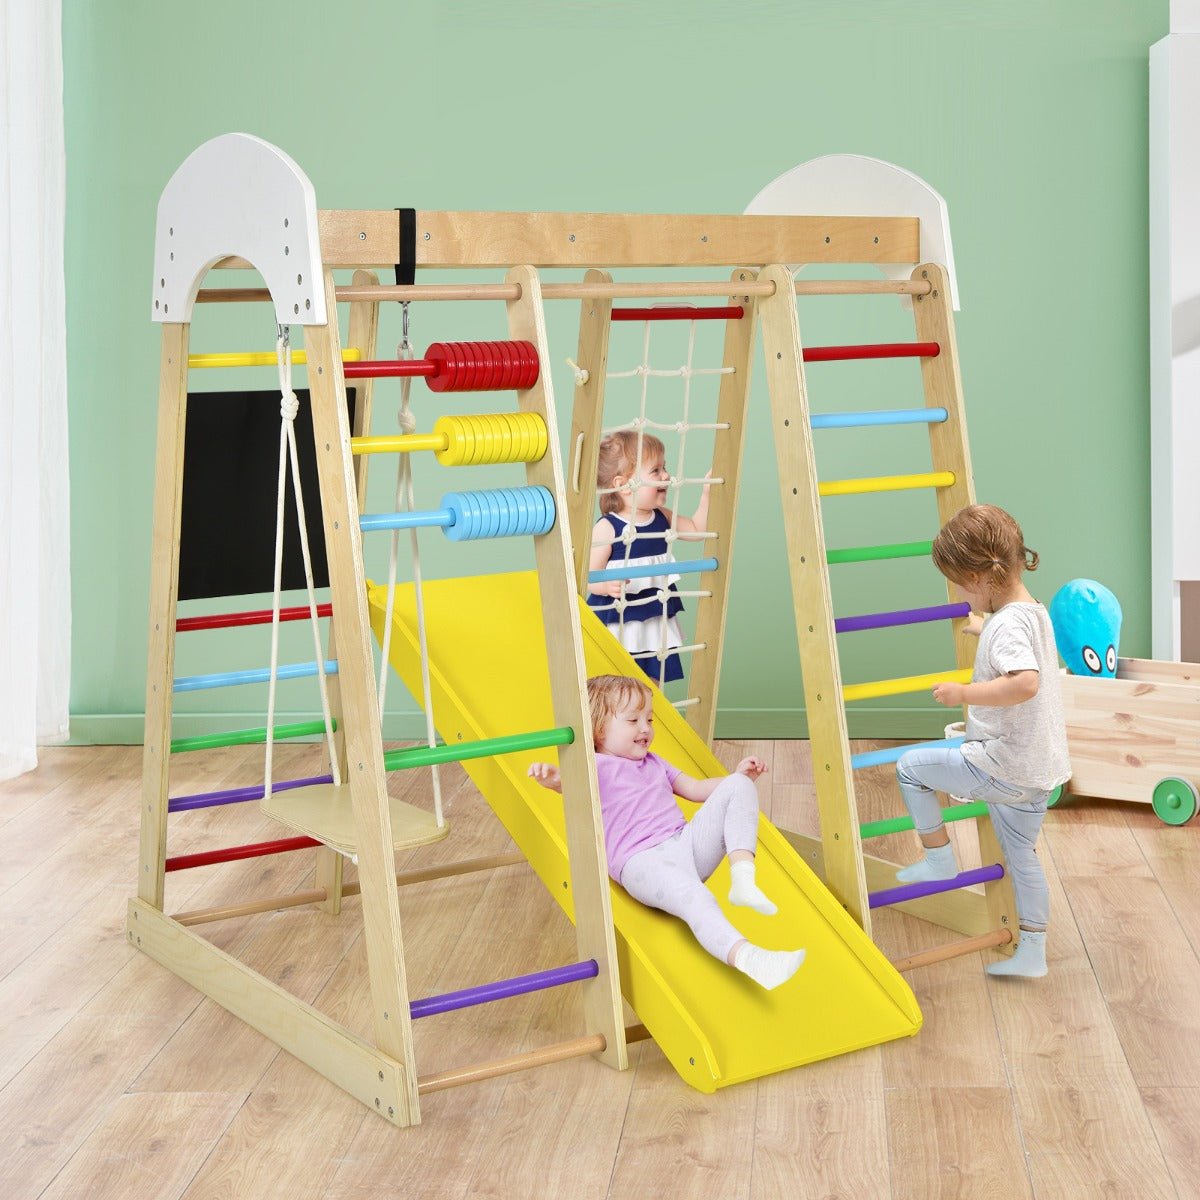 Wooden Climbing Playset for Kids - Available at Kids Mega Mart